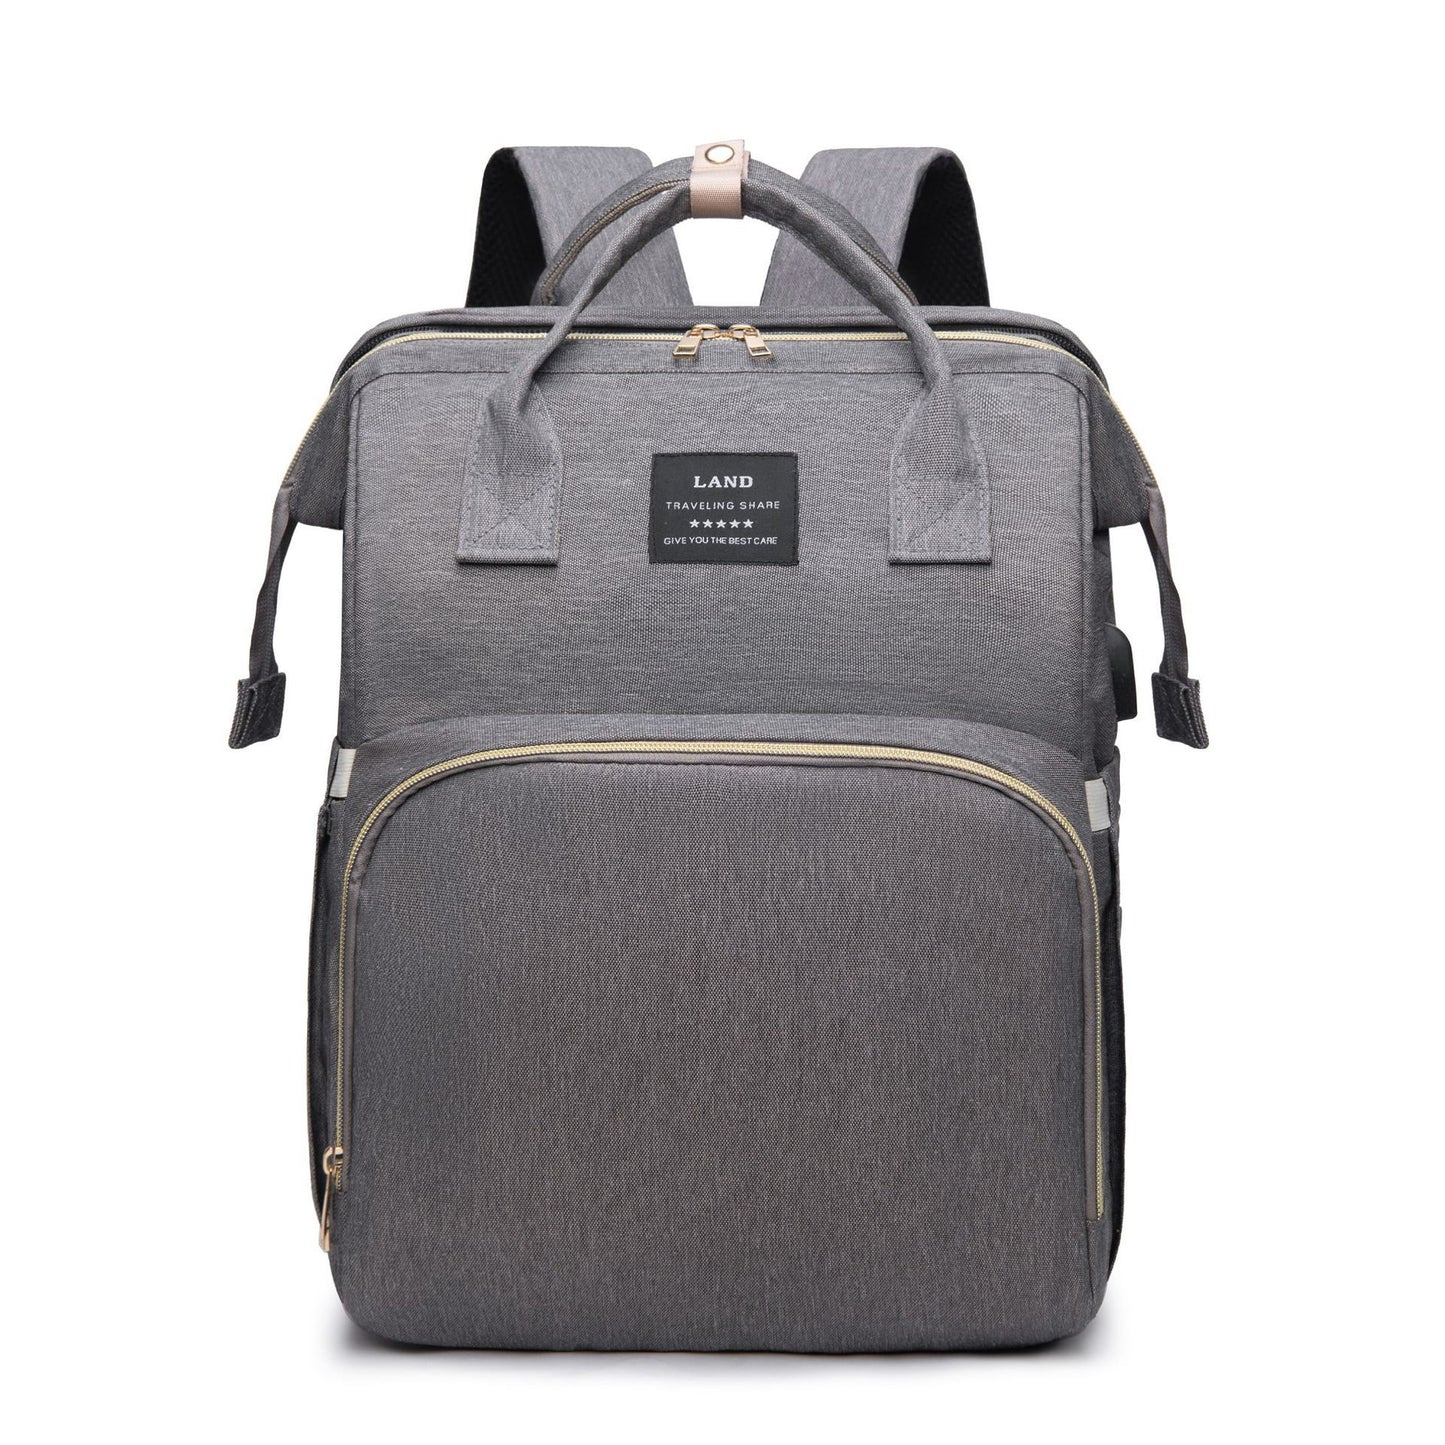 Crib backpack in color gray